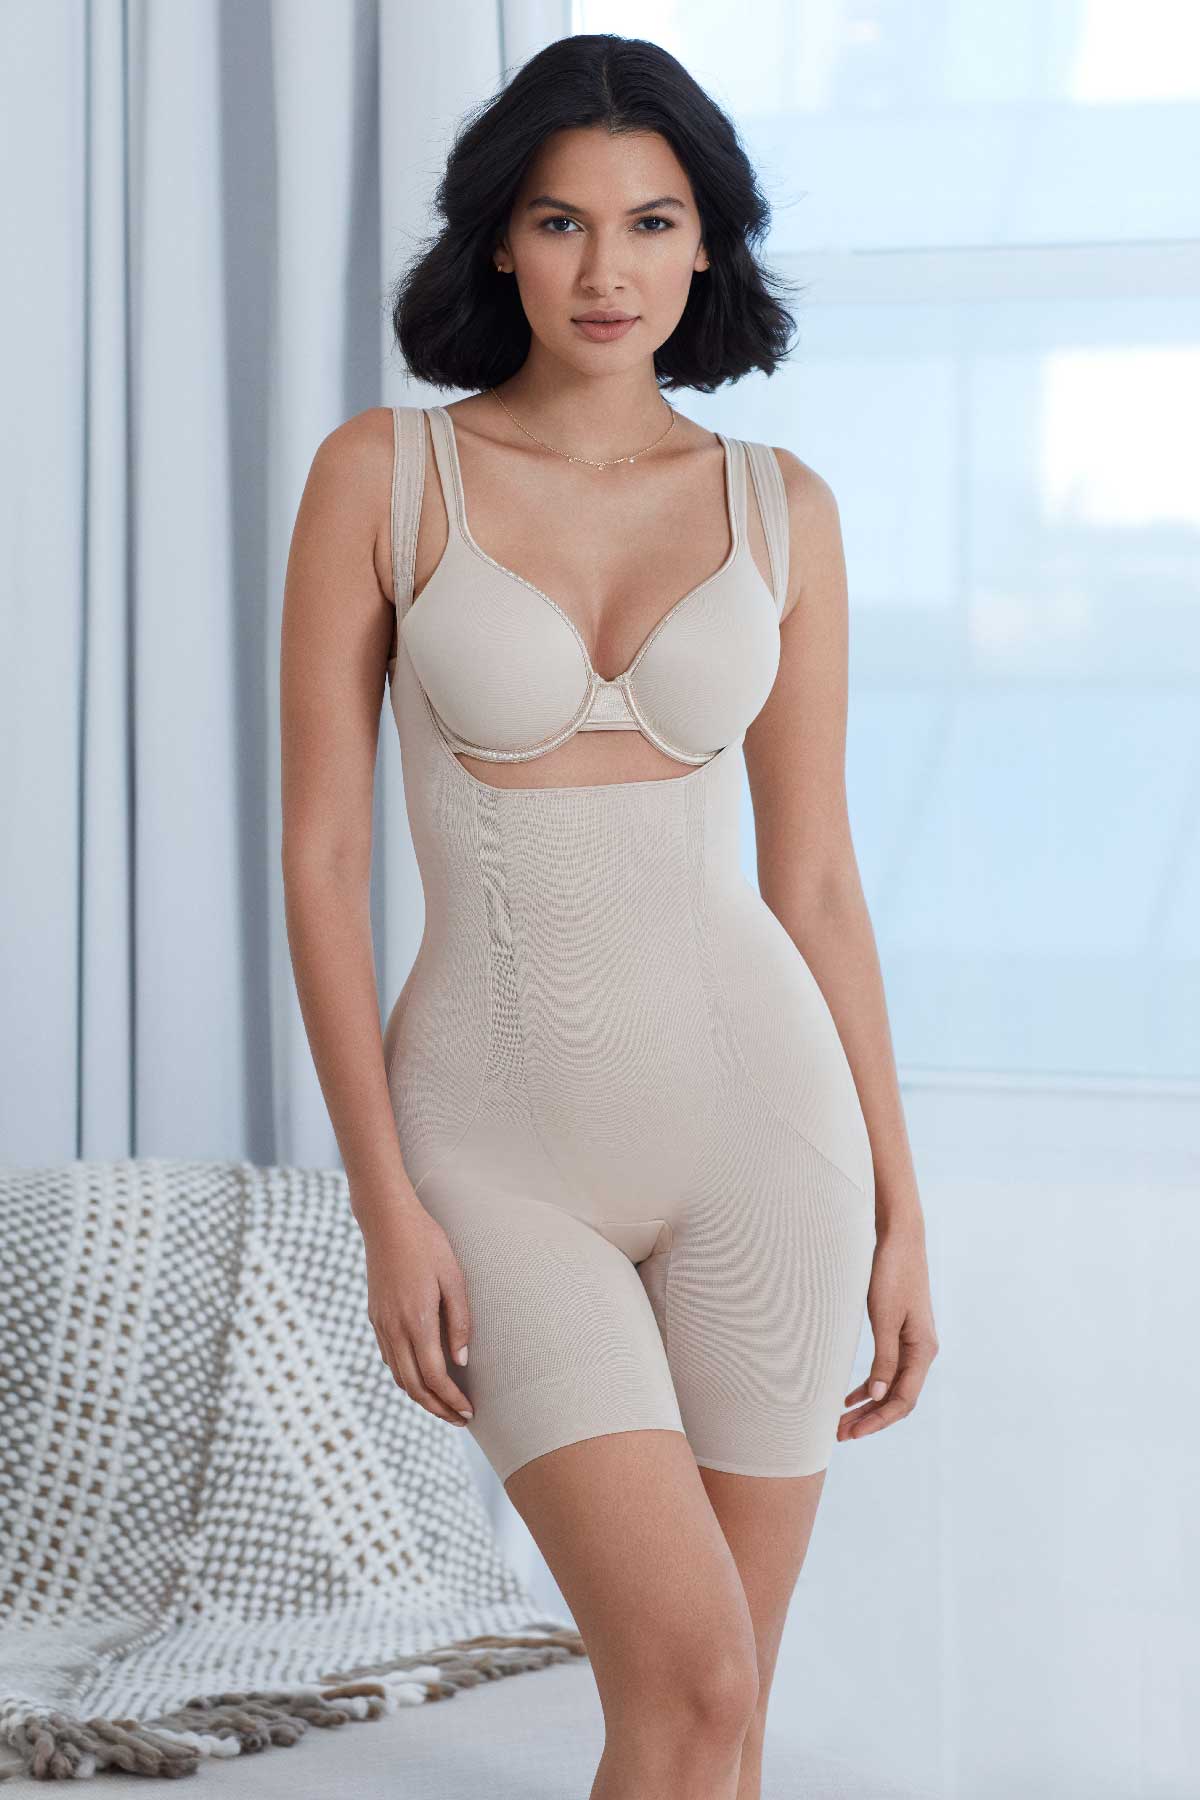 Miraclesuit Torsette Thigh Slimmer